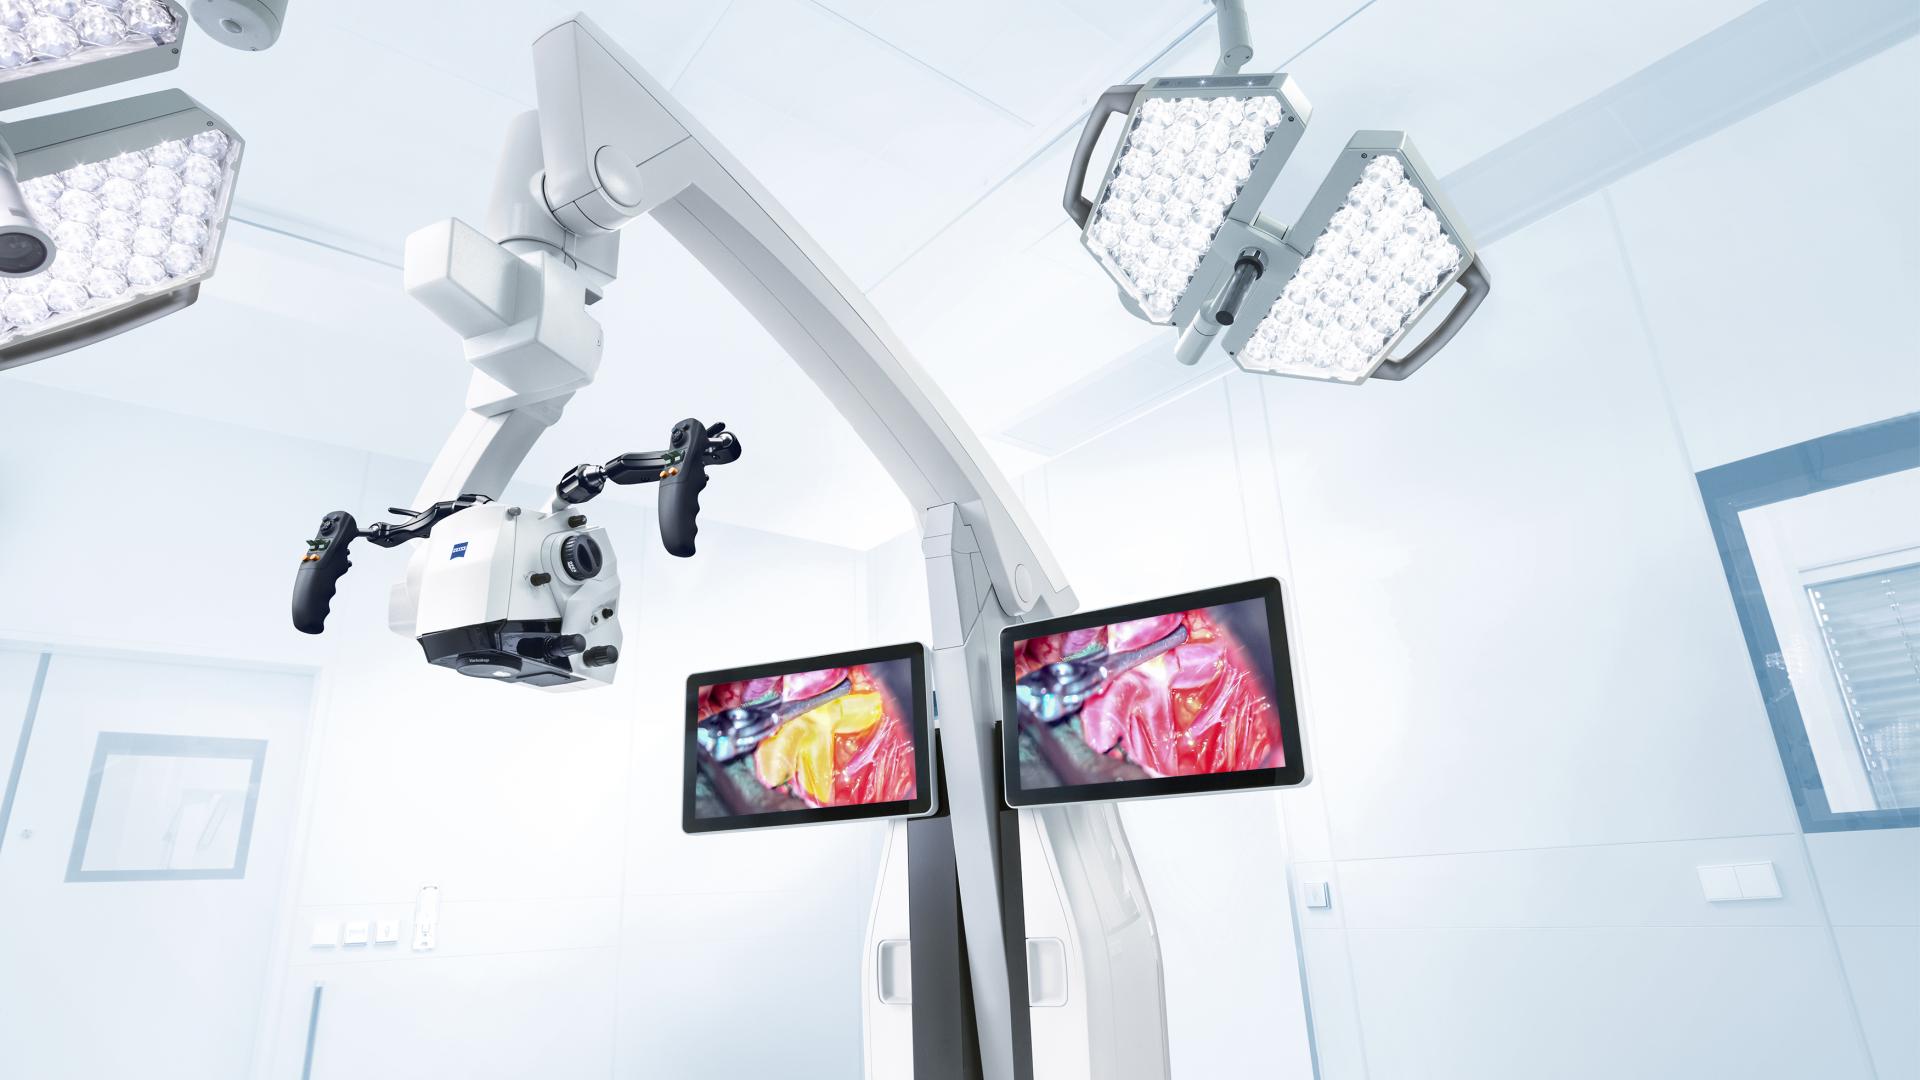 The Robotic Visualization System KINEVO 900 from ZEISS